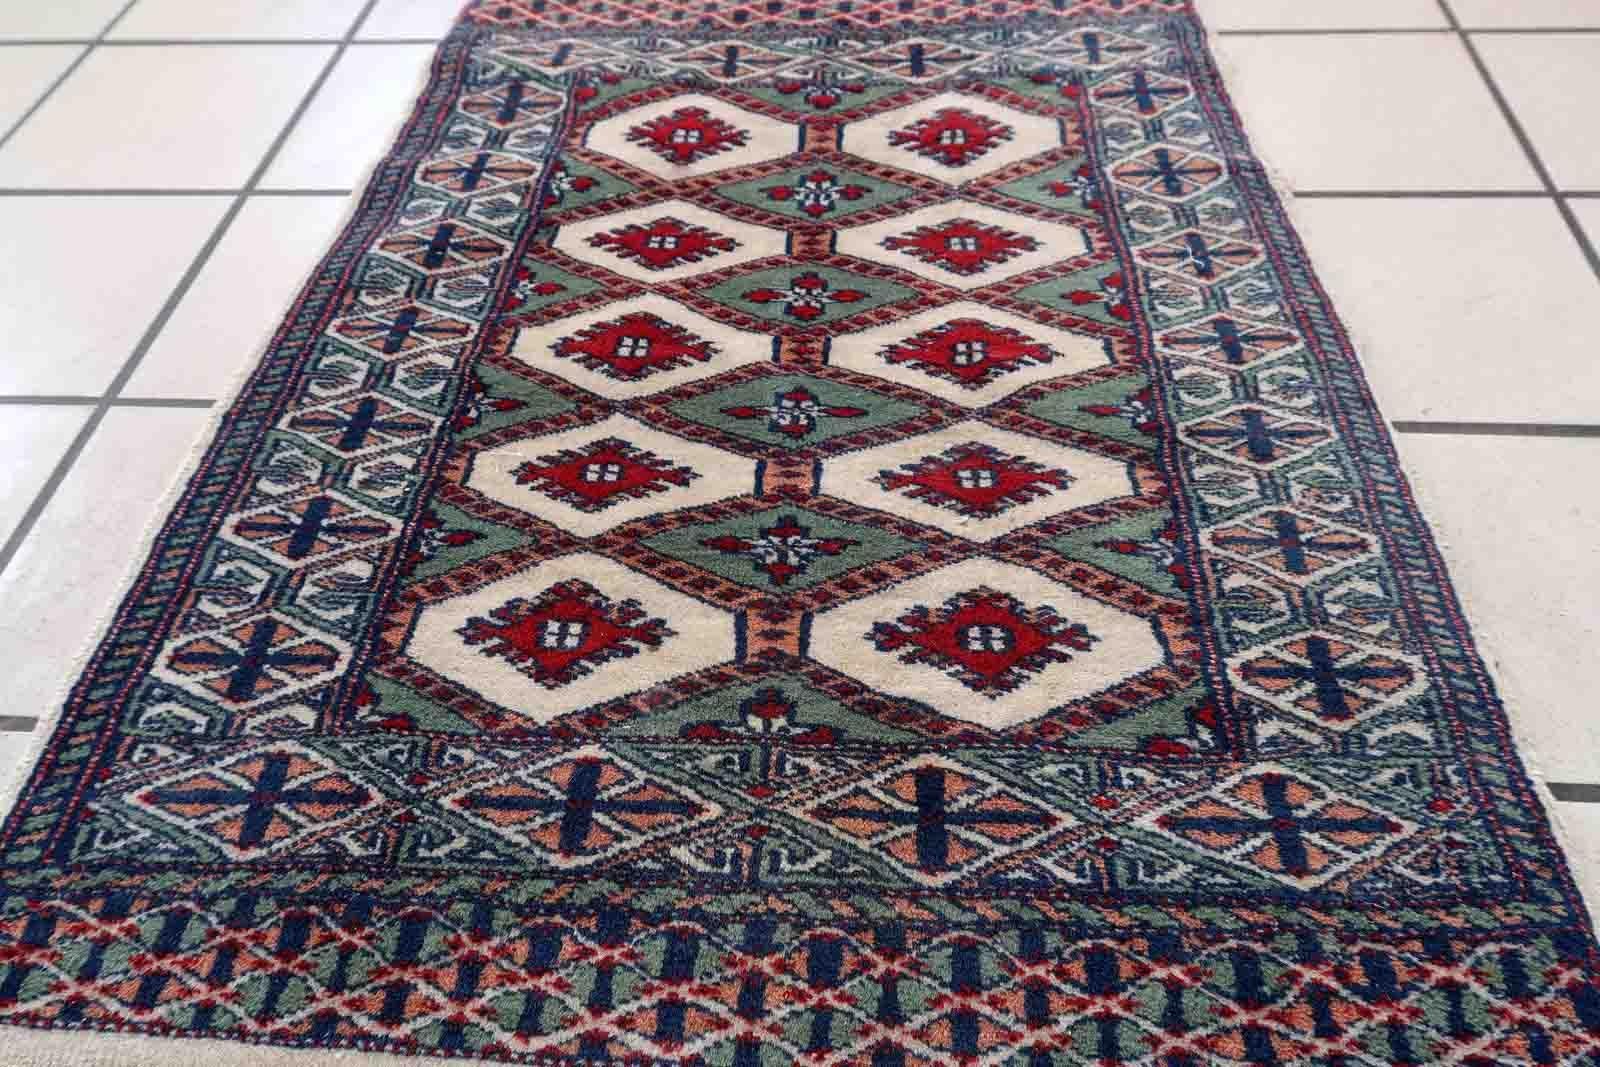 Handmade vintage Bukhara rug in unusual colors. The rug is in original good condition, it is from the end of 20th century.

-condition: original good,

-circa: 1970s,

-size: 1.8' x 2.7' (56cm x 83cm),

-material: wool,

-country of origin: